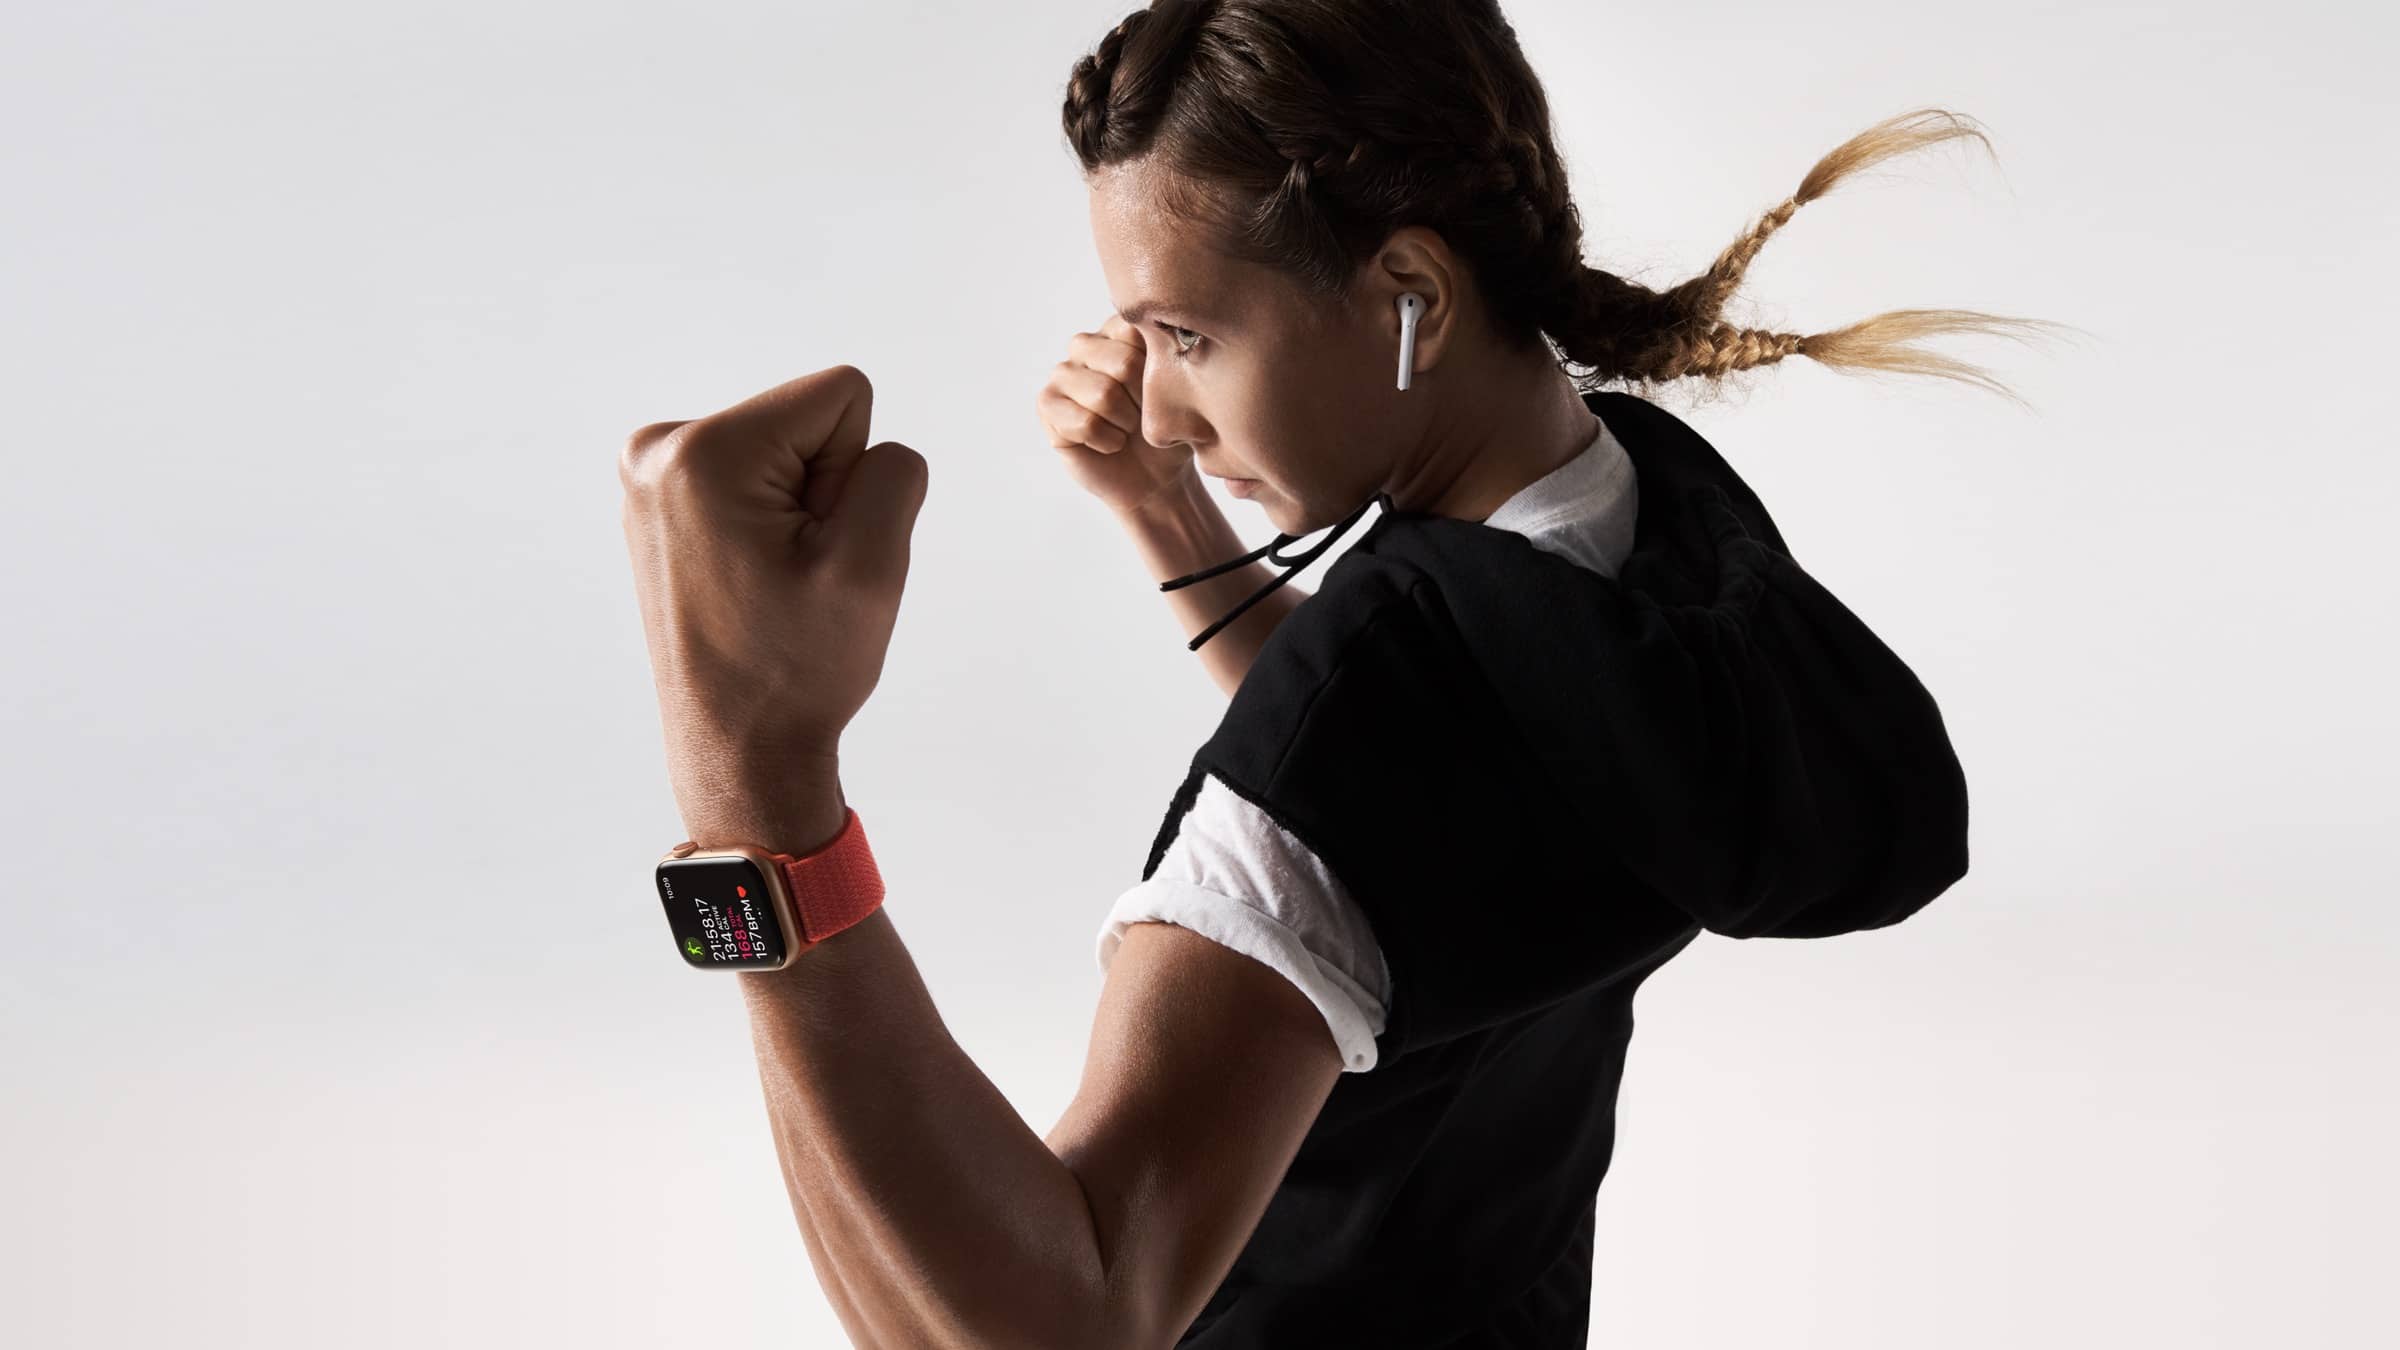 The best smartwatches in 2019 to keep track of your fitness goals with